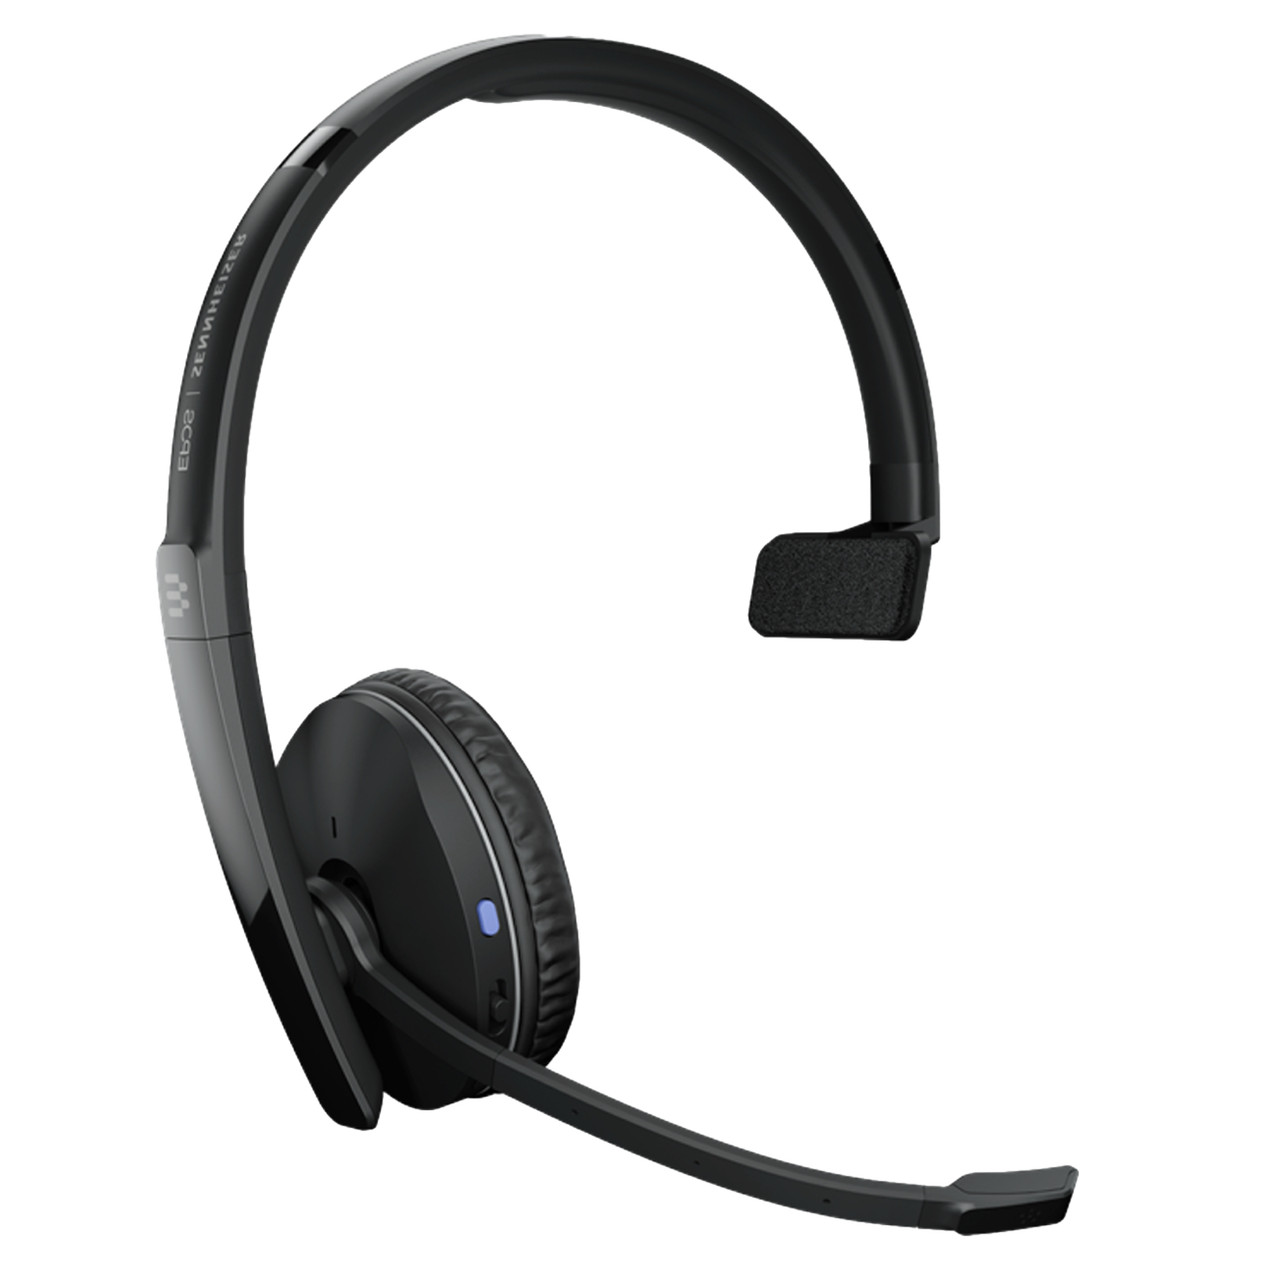 Sennheiser 231 Bluetooth Headset- The ultra-secure bluetooth wireless headset is the choice medical, government and contact centers or anywhere sensitive conversations happen